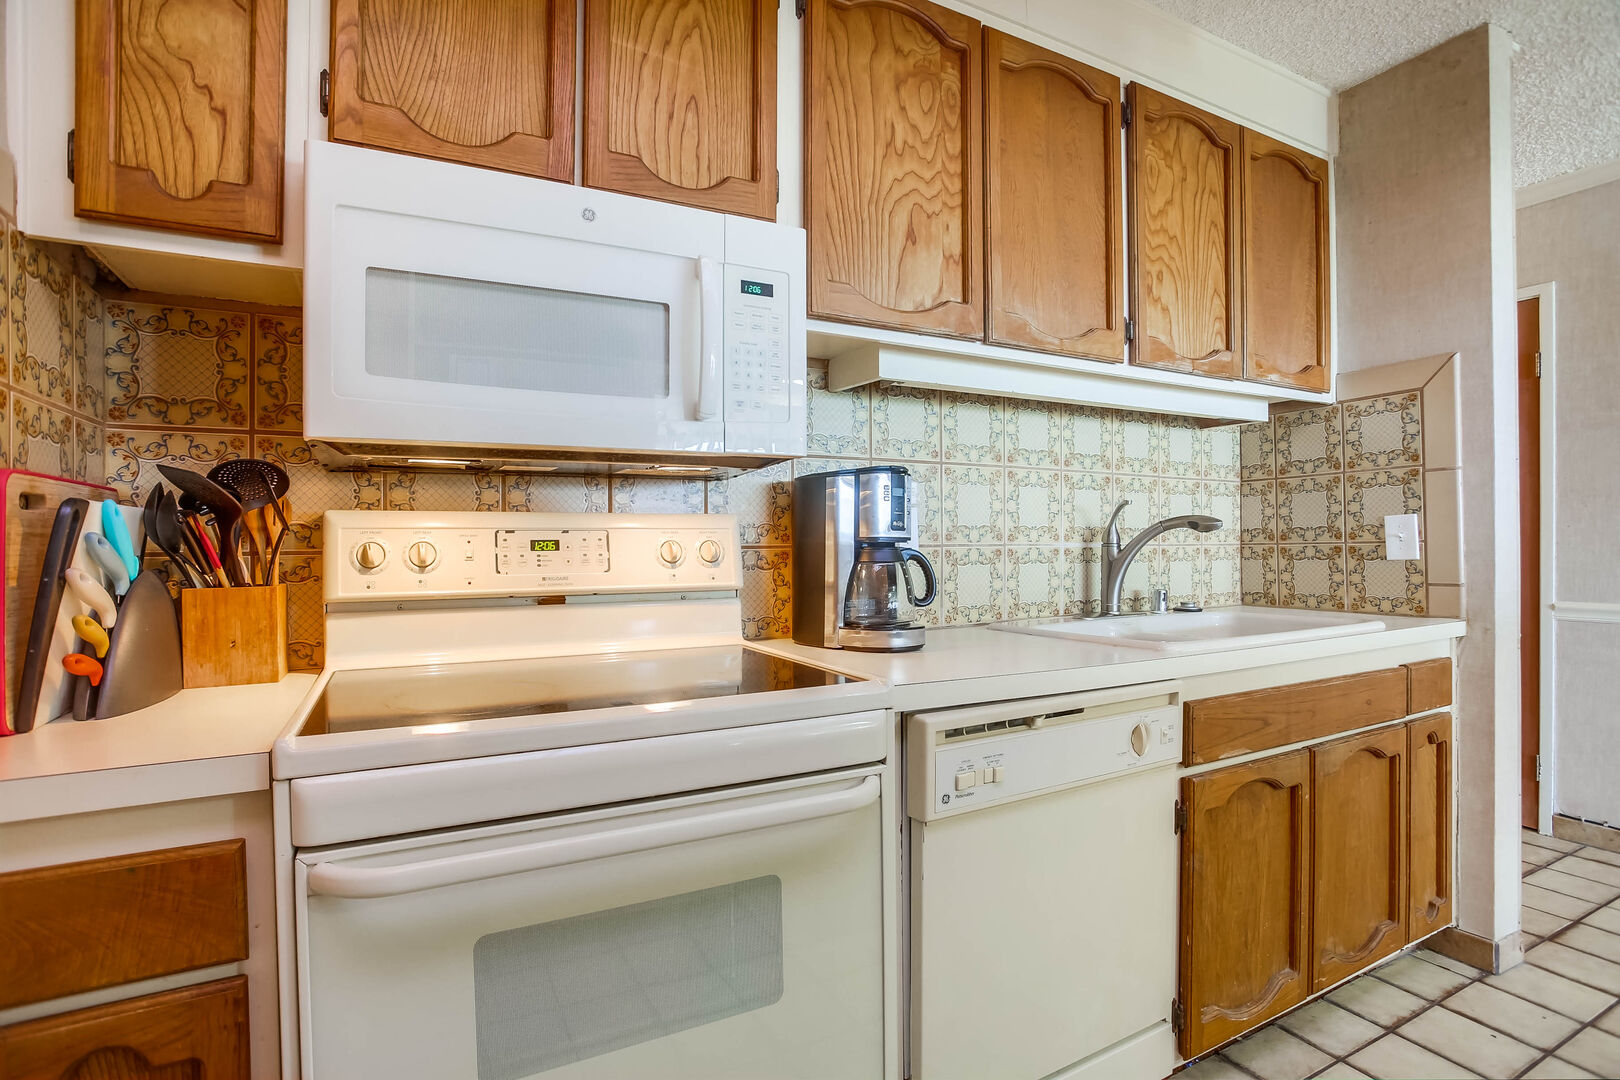 Kitchen appliances include stove, oven, microwave, dishwasher, refrigerator and coffee maker